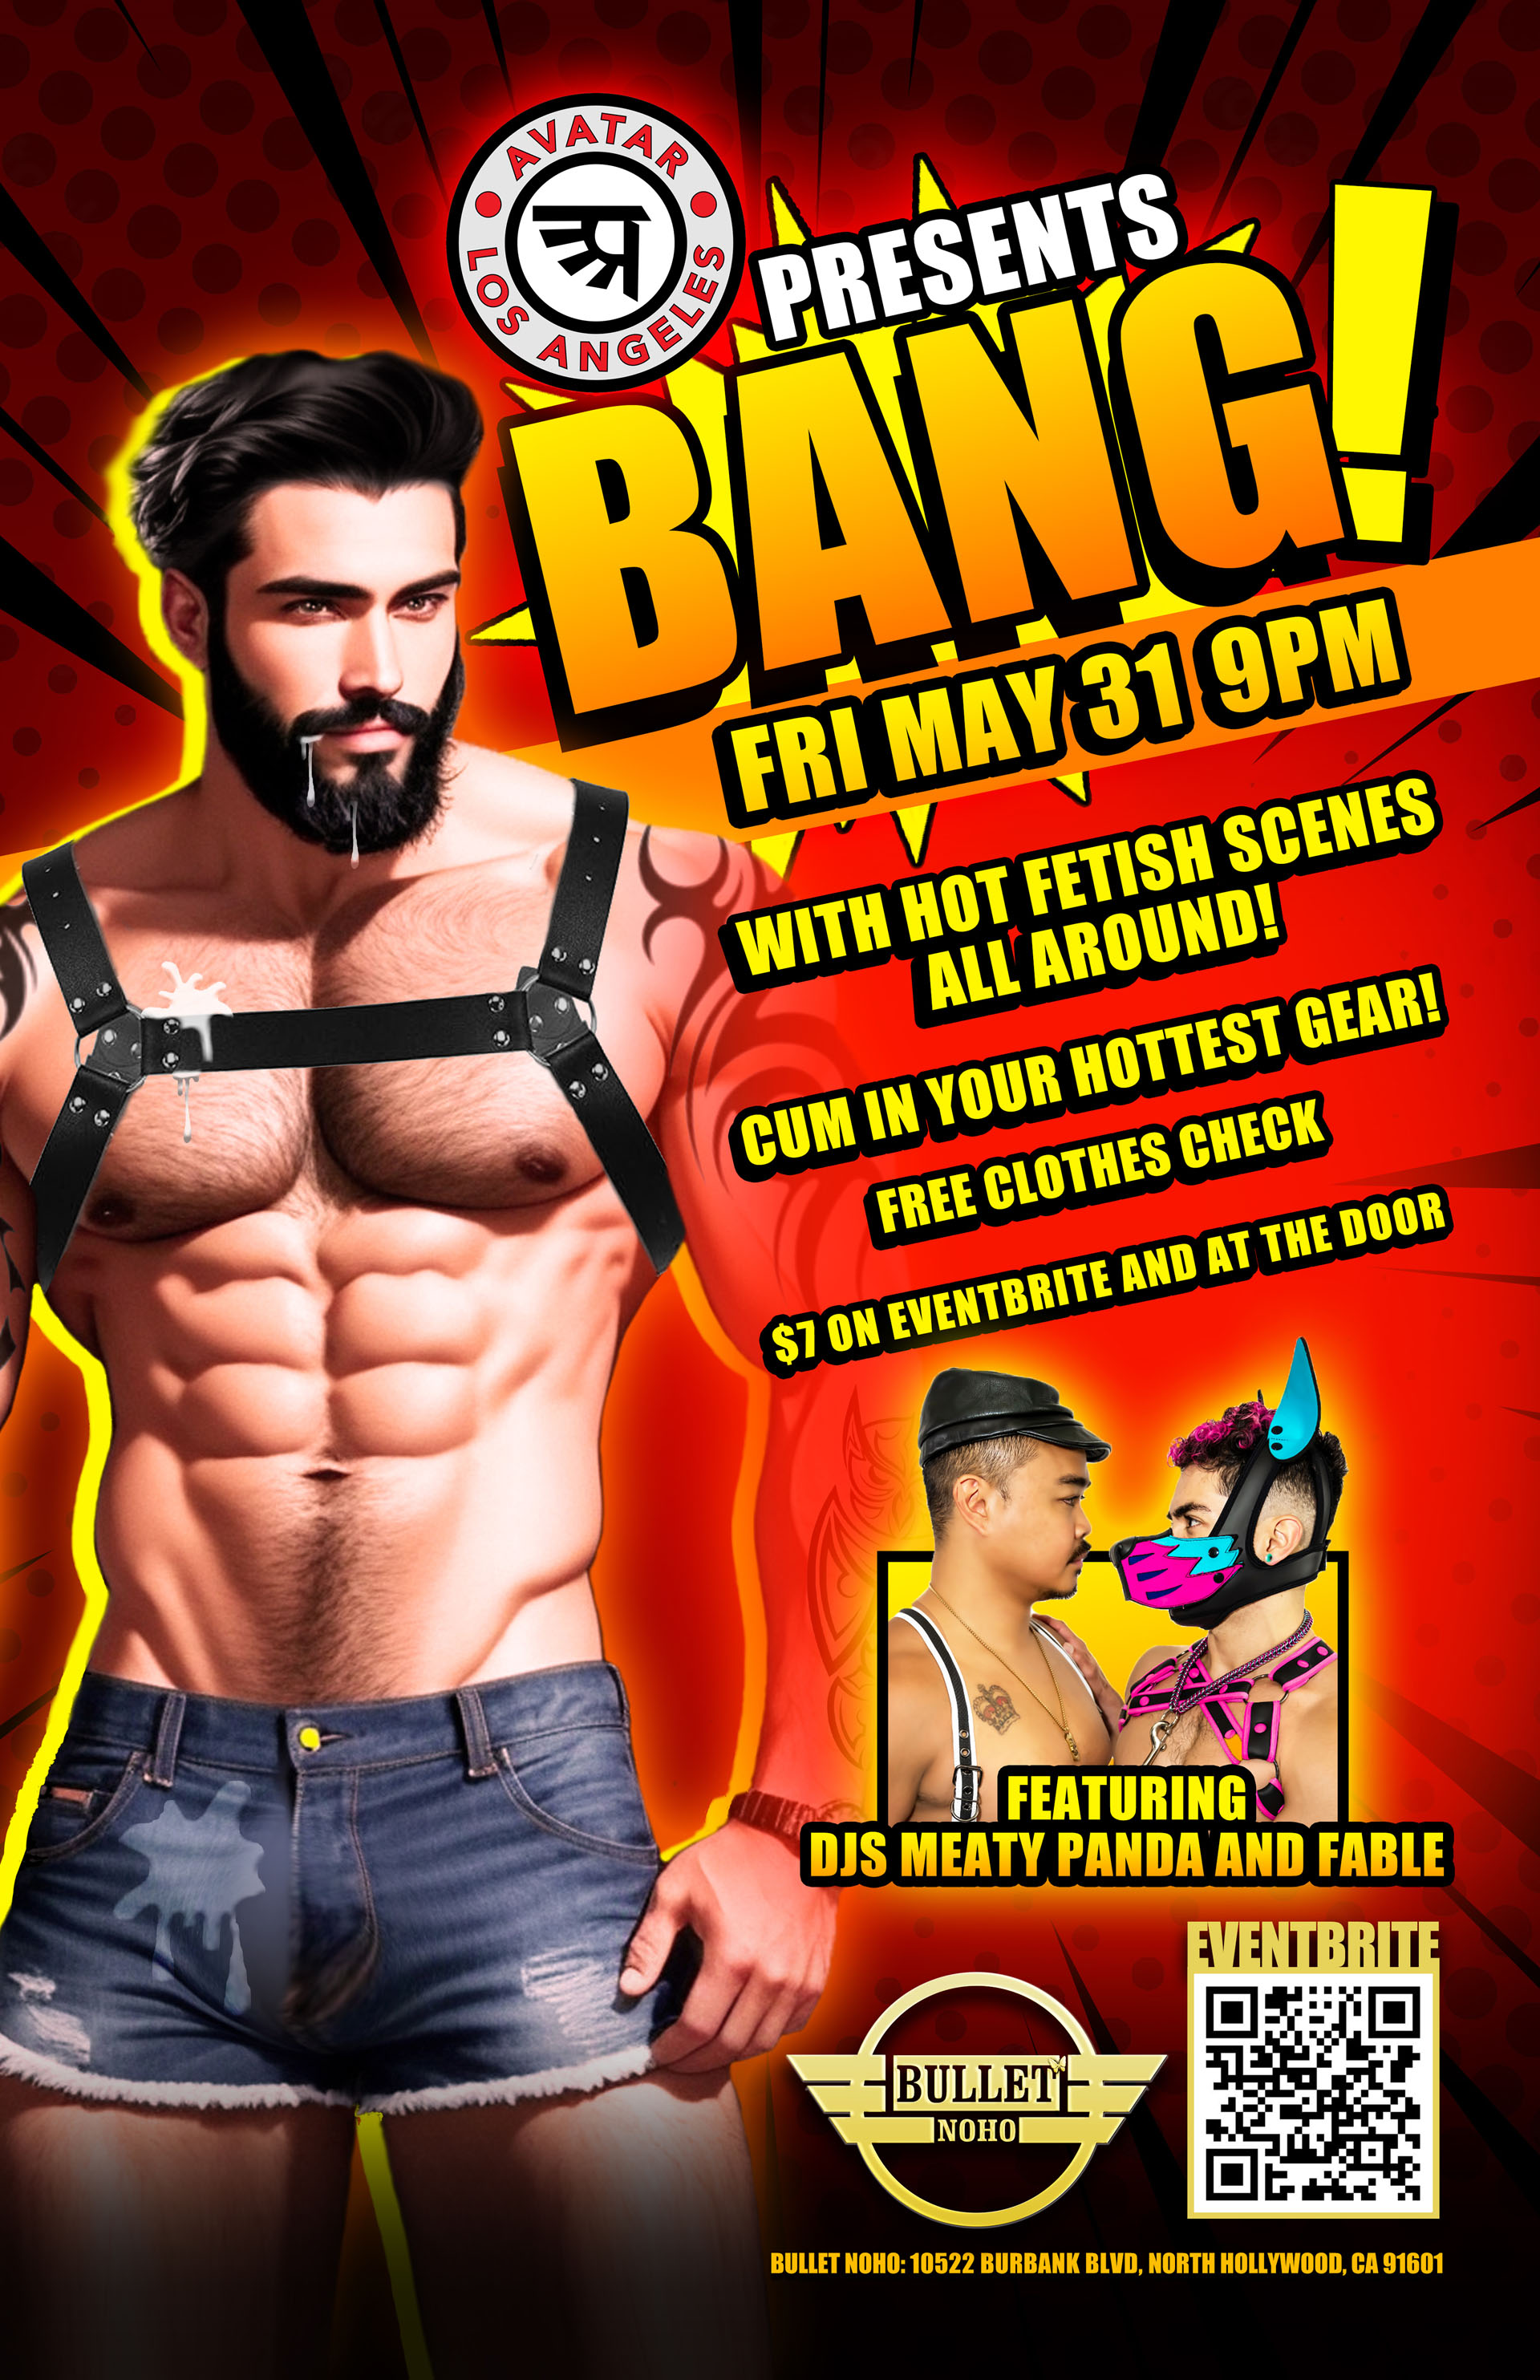 THE BULLET BAR and AVATAR LOS ANGELES Present BANG!: Friday, 05/31/24 at 9:00 PM! With HOT FETISH SCENES all around! Free Clothes Check. $7 on Eventbrite and at the door. https://www.qrfy.com/sag6_okFTE